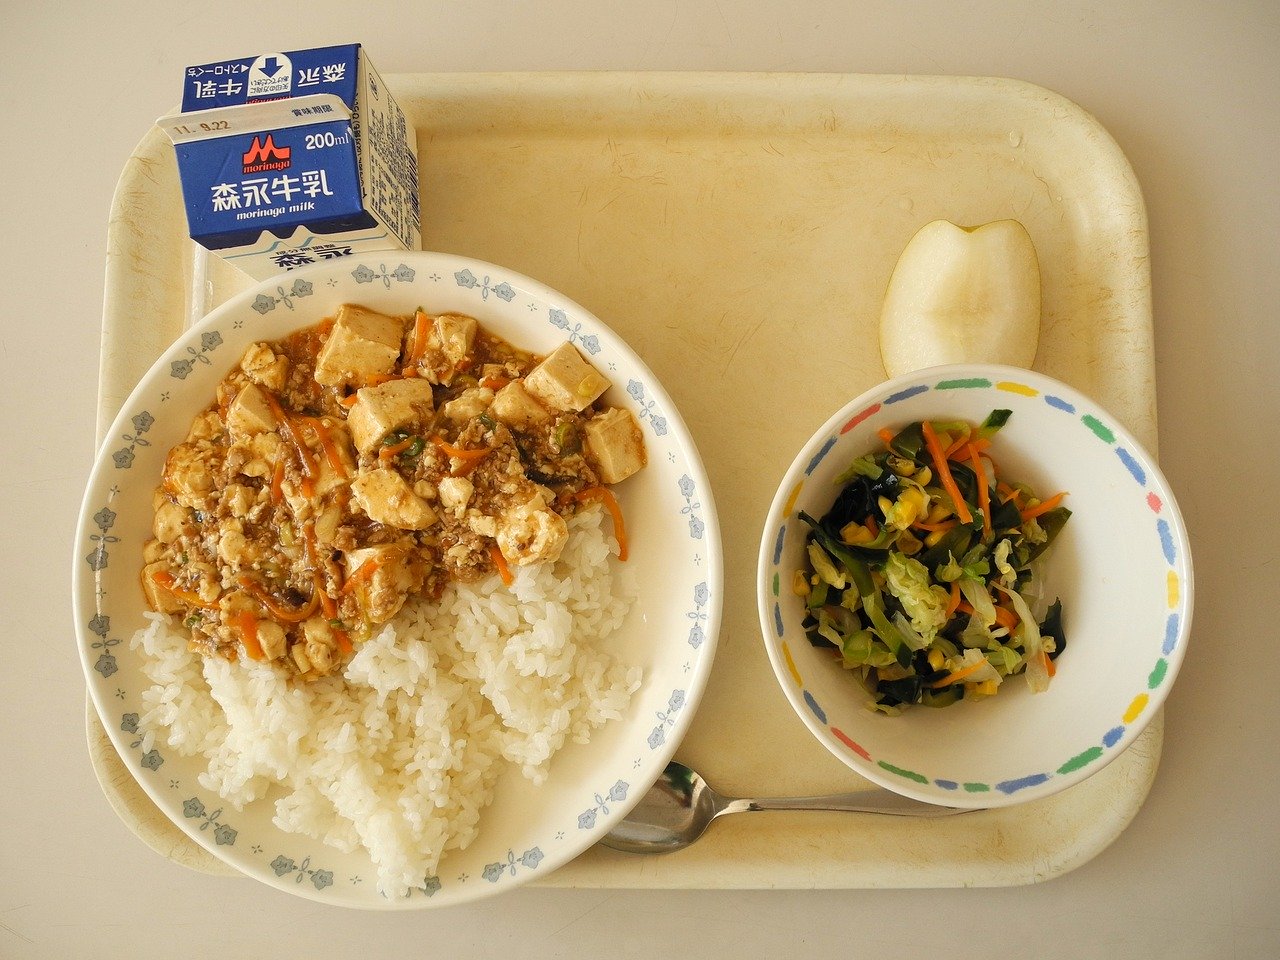 Problem of Japanese School Lunch